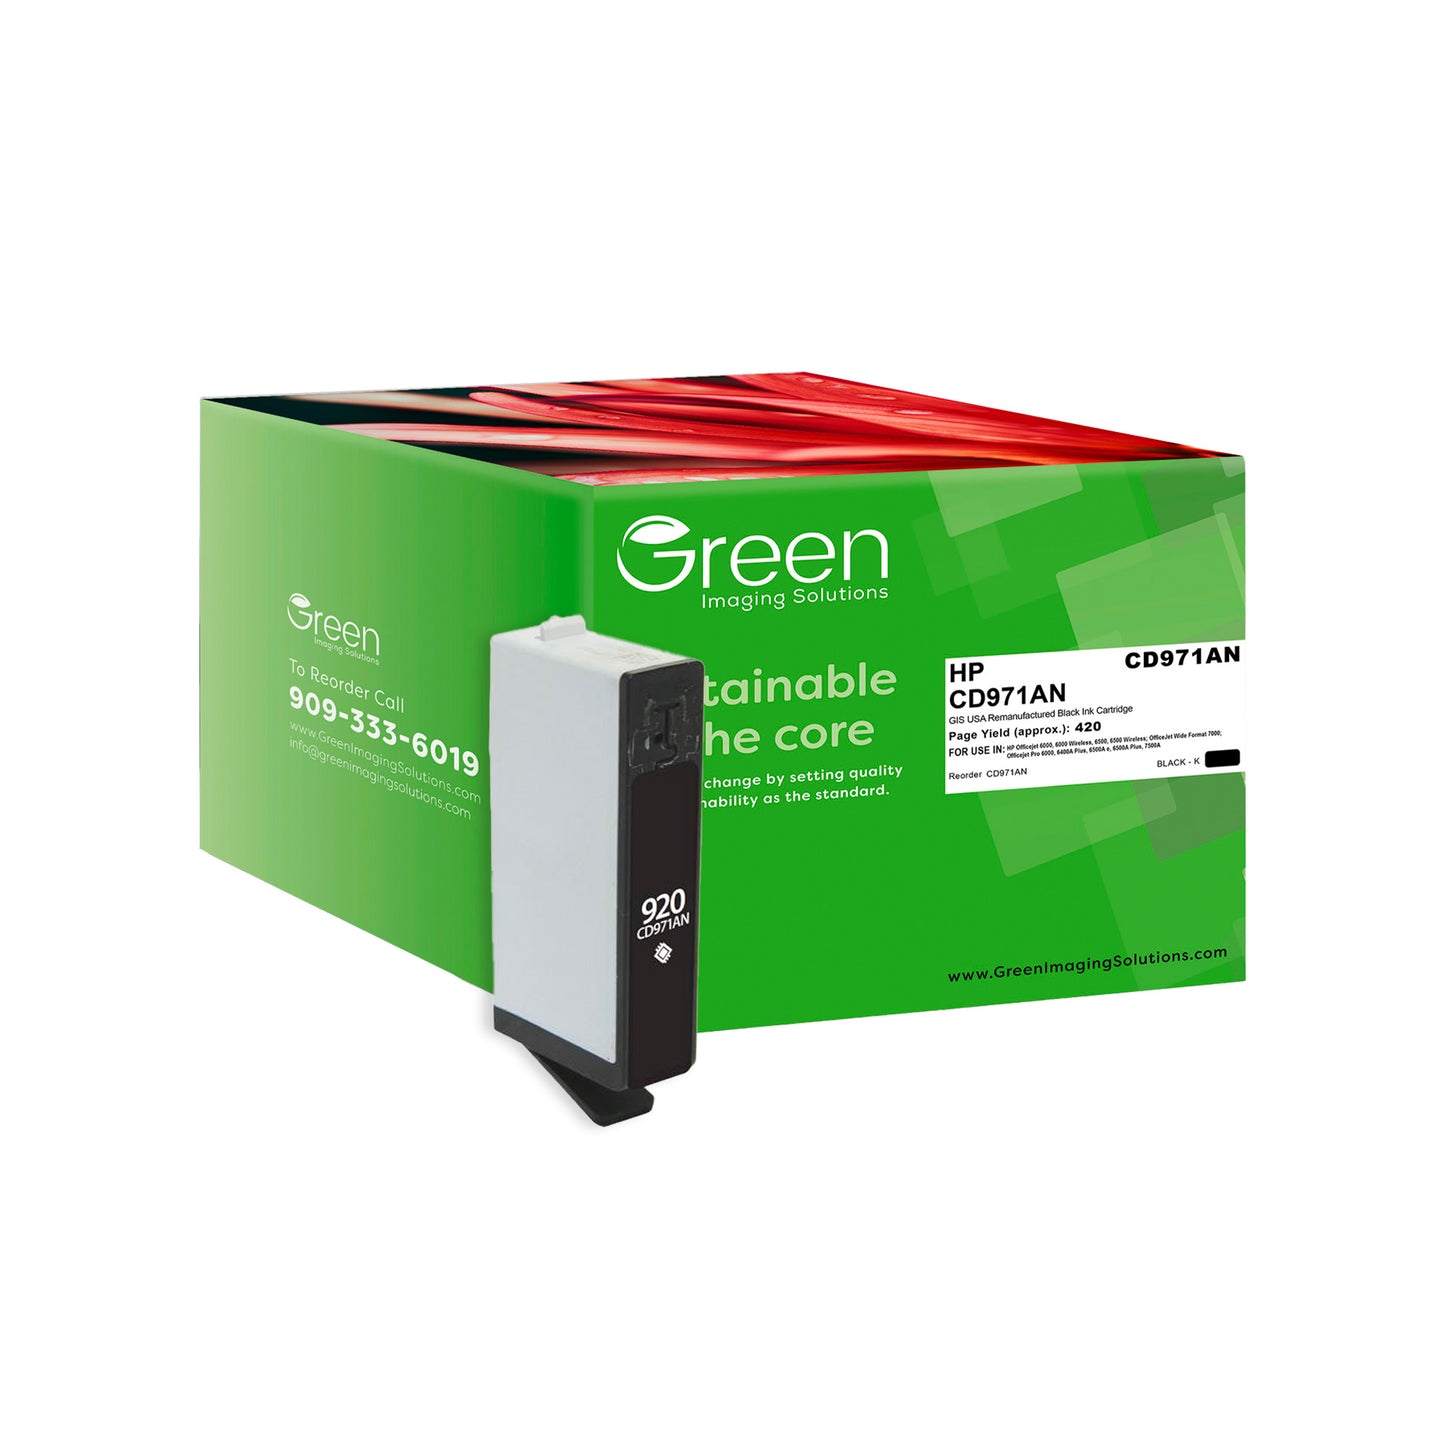 Green Imaging Solutions USA Remanufactured Black Ink Cartridge for HP 920 (CD971AN)